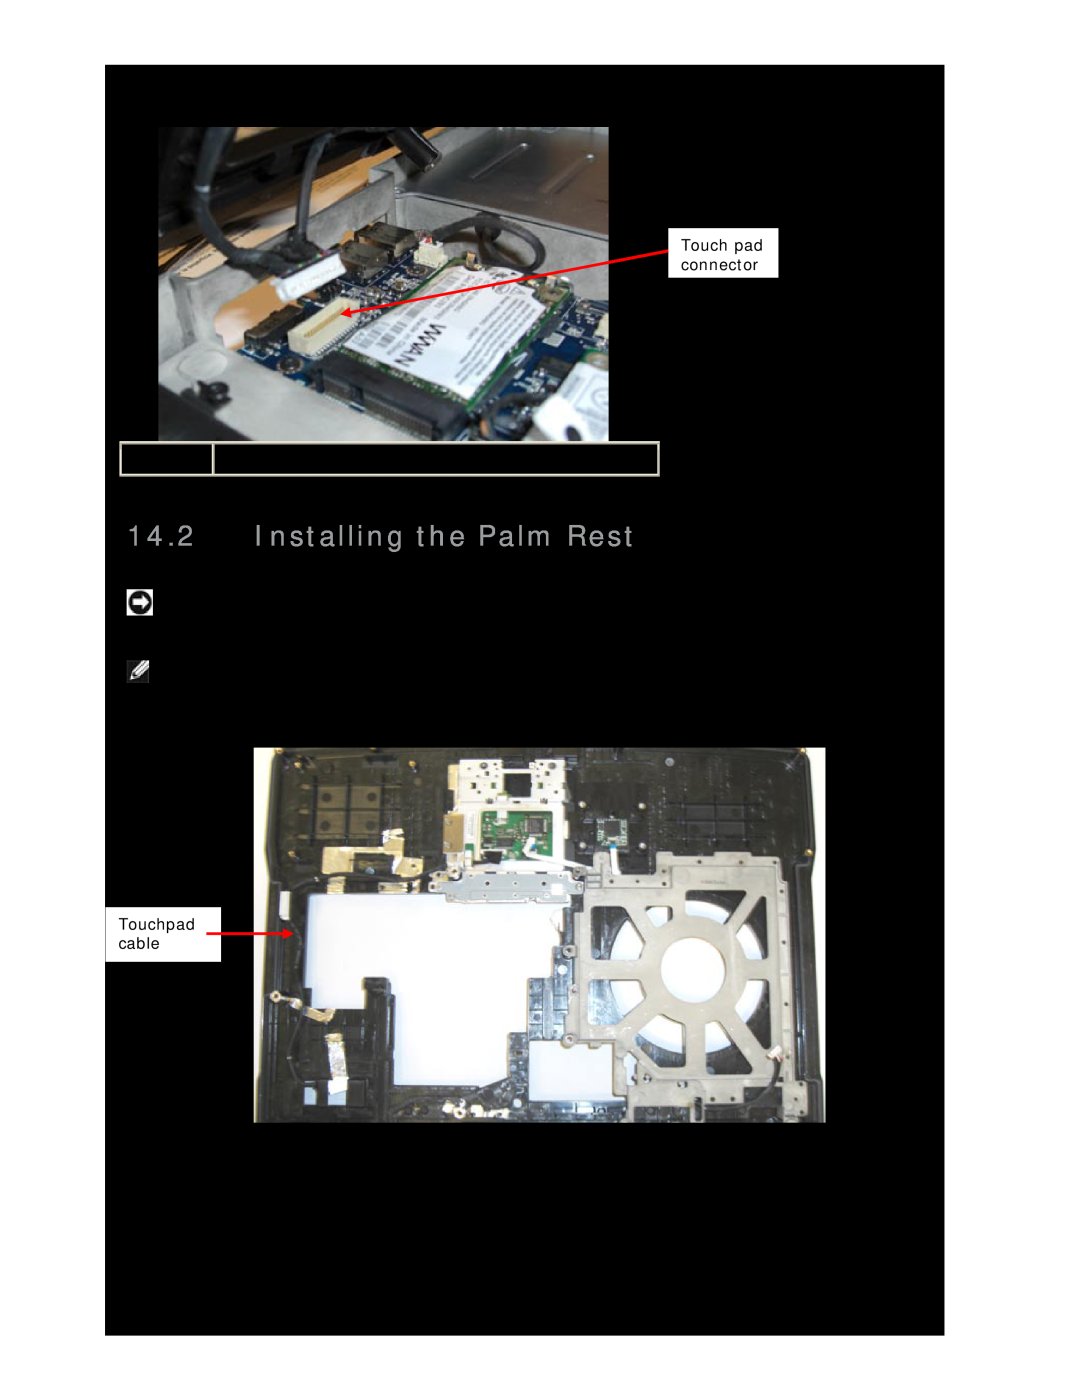 Dell D630 service manual Installing the Palm Rest, Underside of Palm Rest showing Touchpad Cable Route 